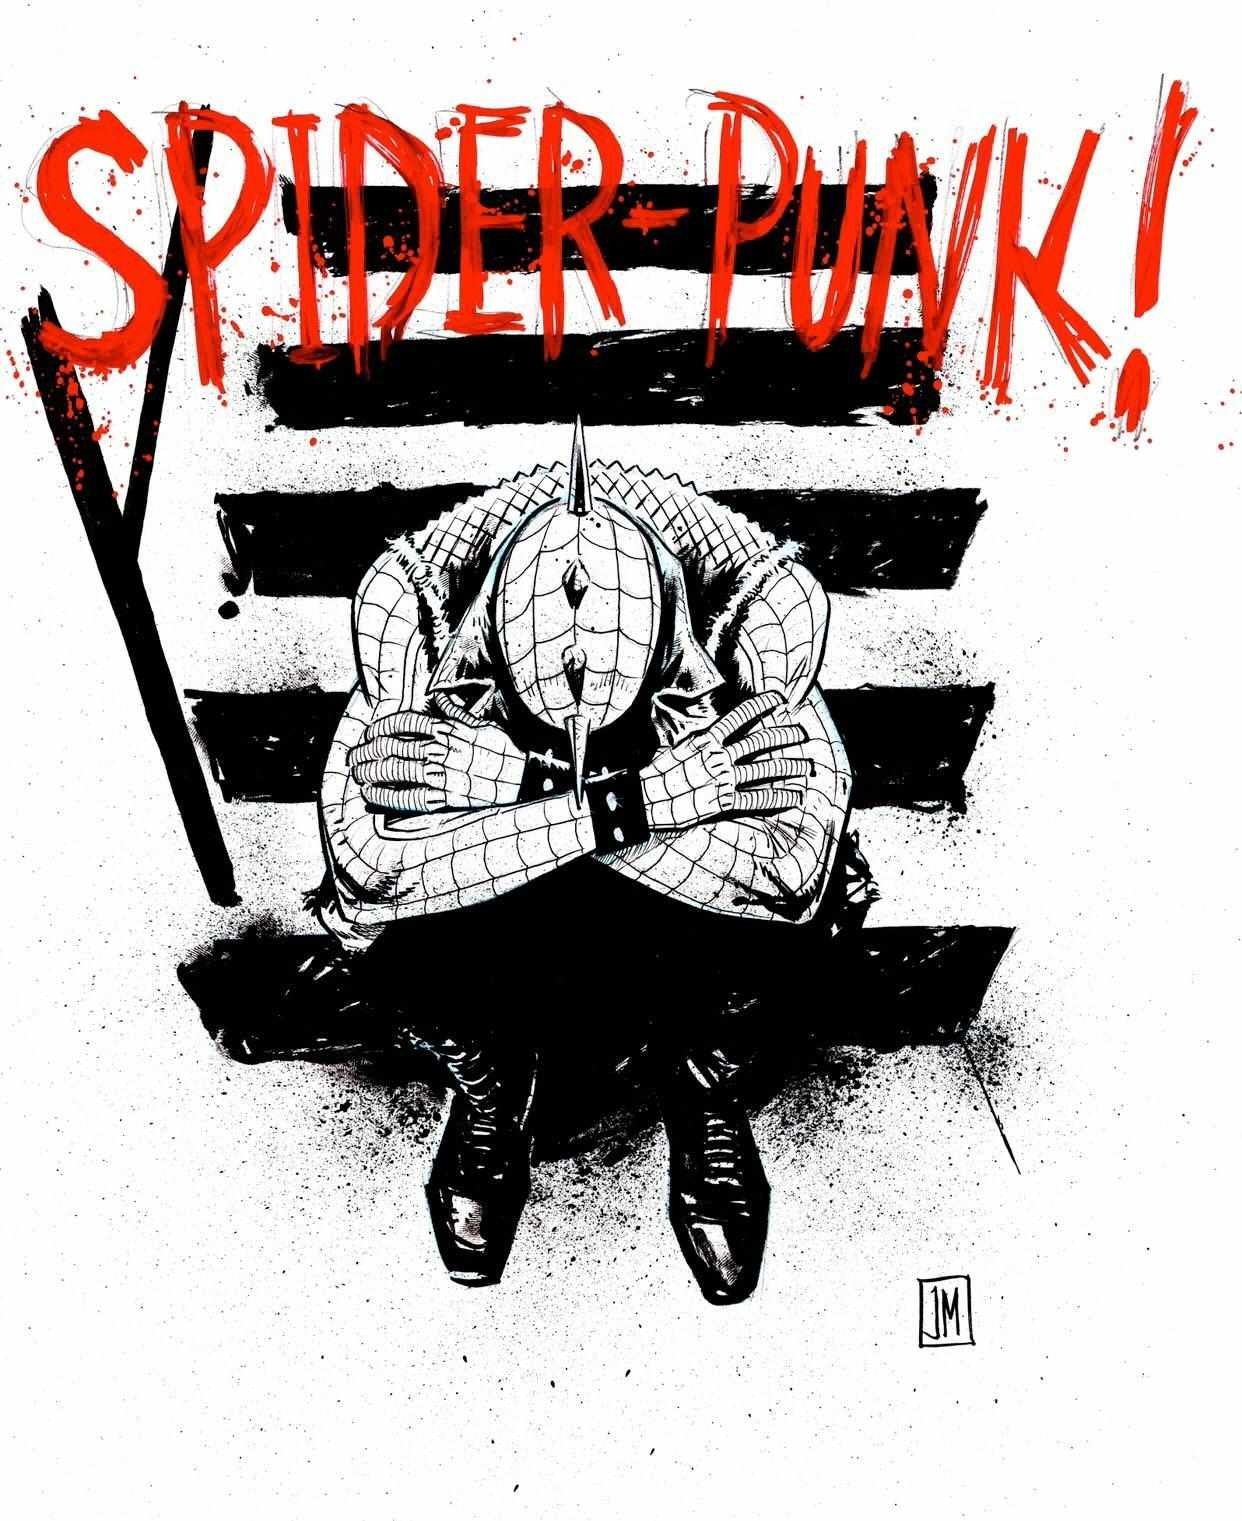 Spider-Punk - Rancid: And Out Come The Wolves homage art by Justin 